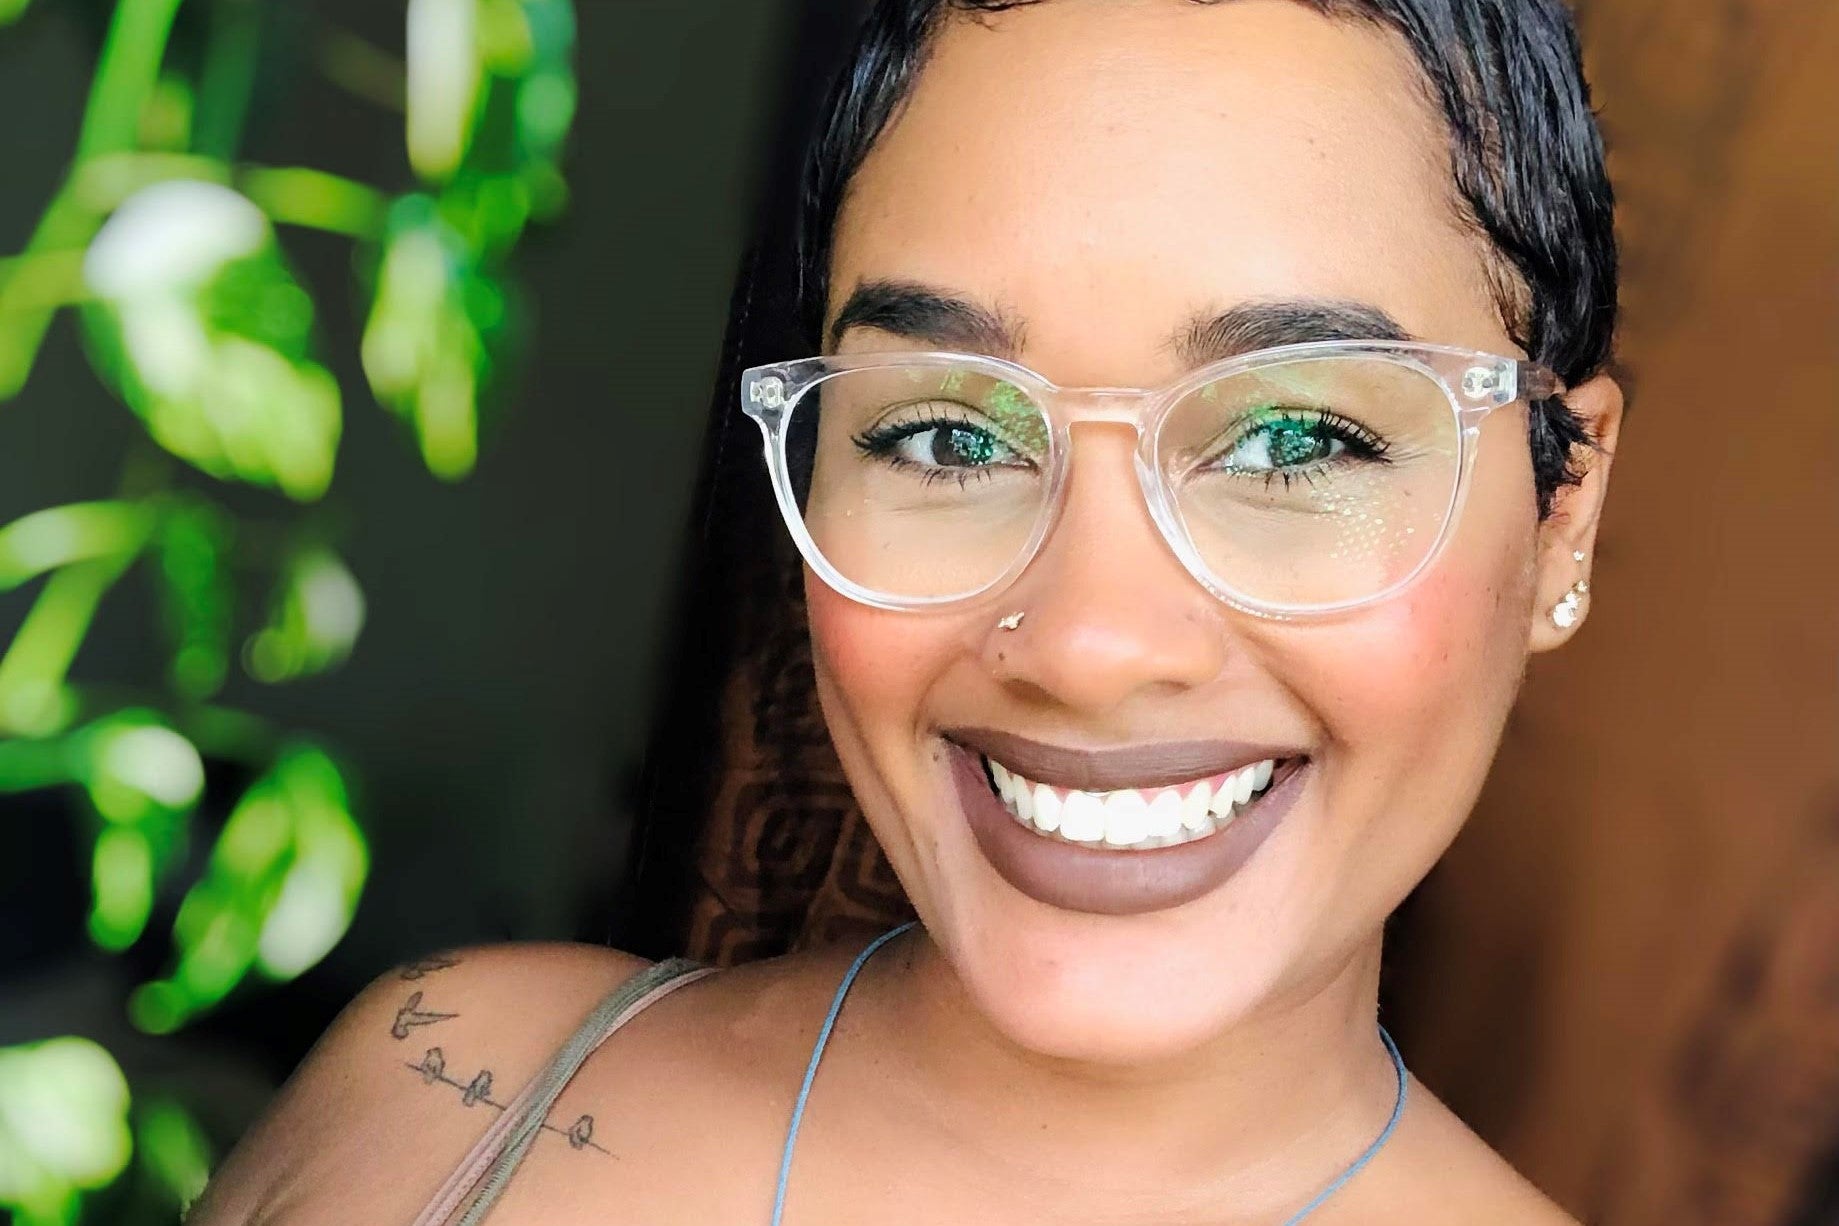 10 Reasons You Should Fall In Love With Glasses Frames For Women | KOALAEYE OPTICAL